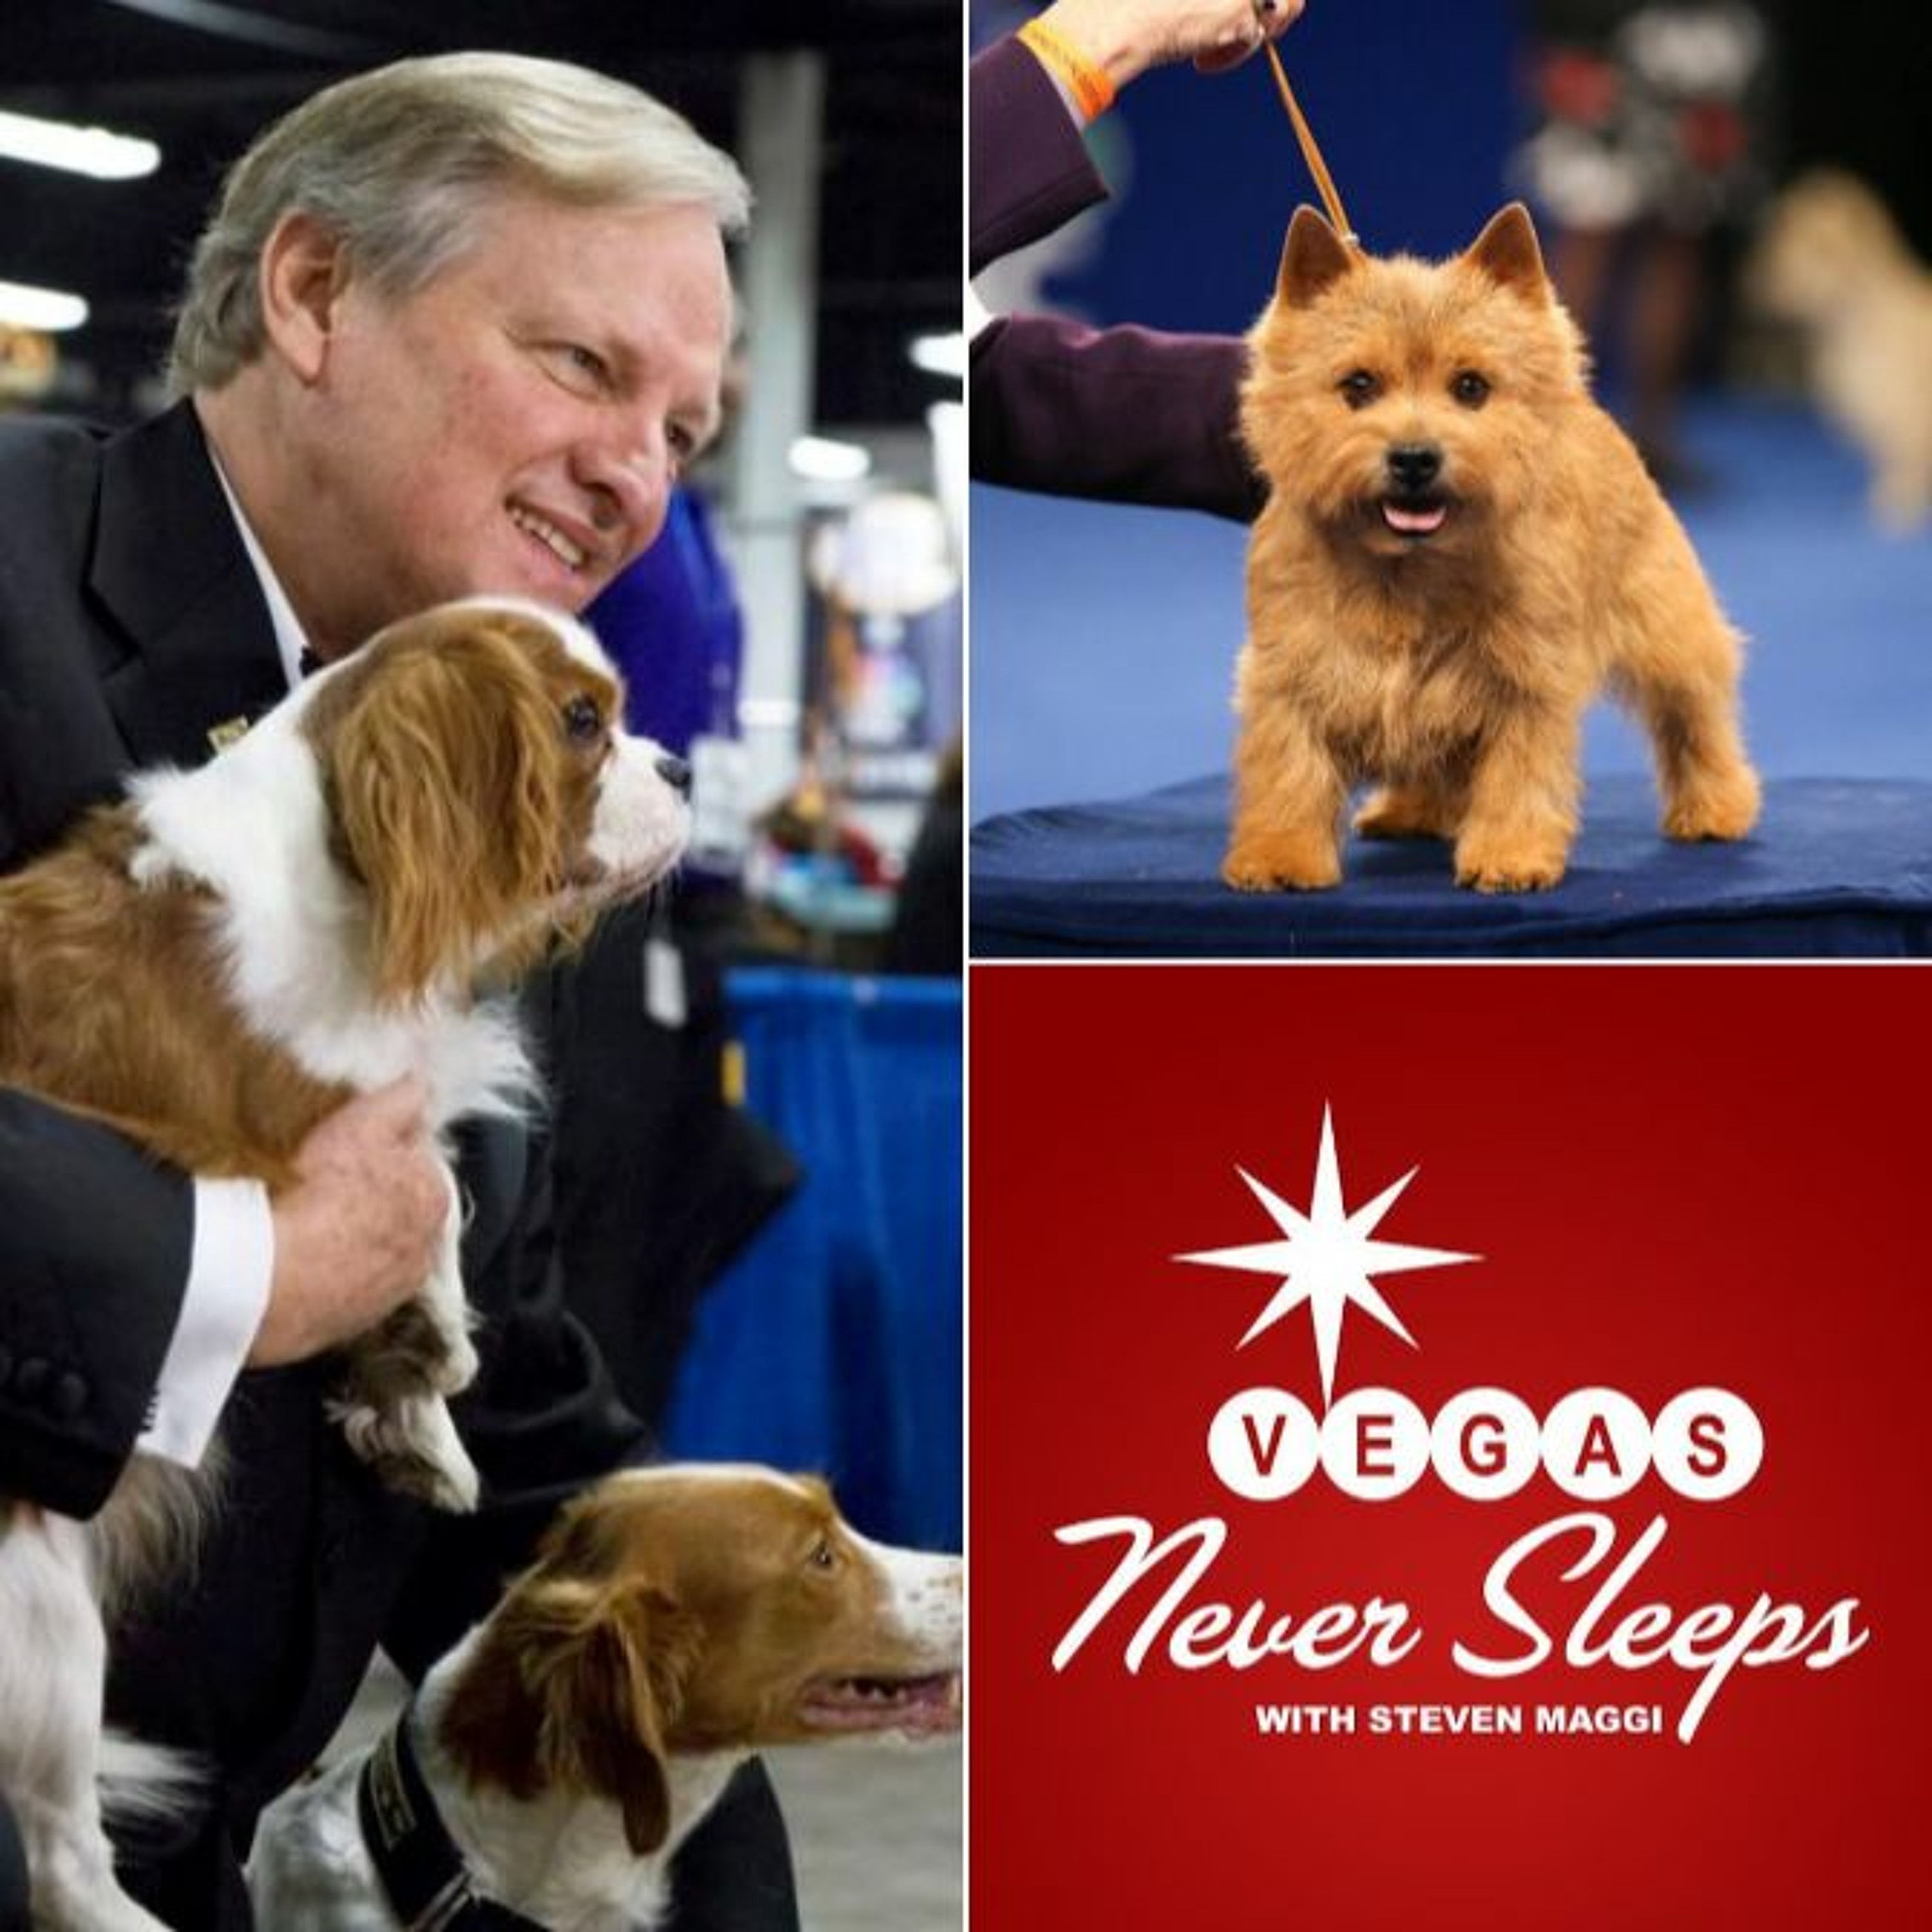 ”The National Dog Show” - The Complete David Frei Interview